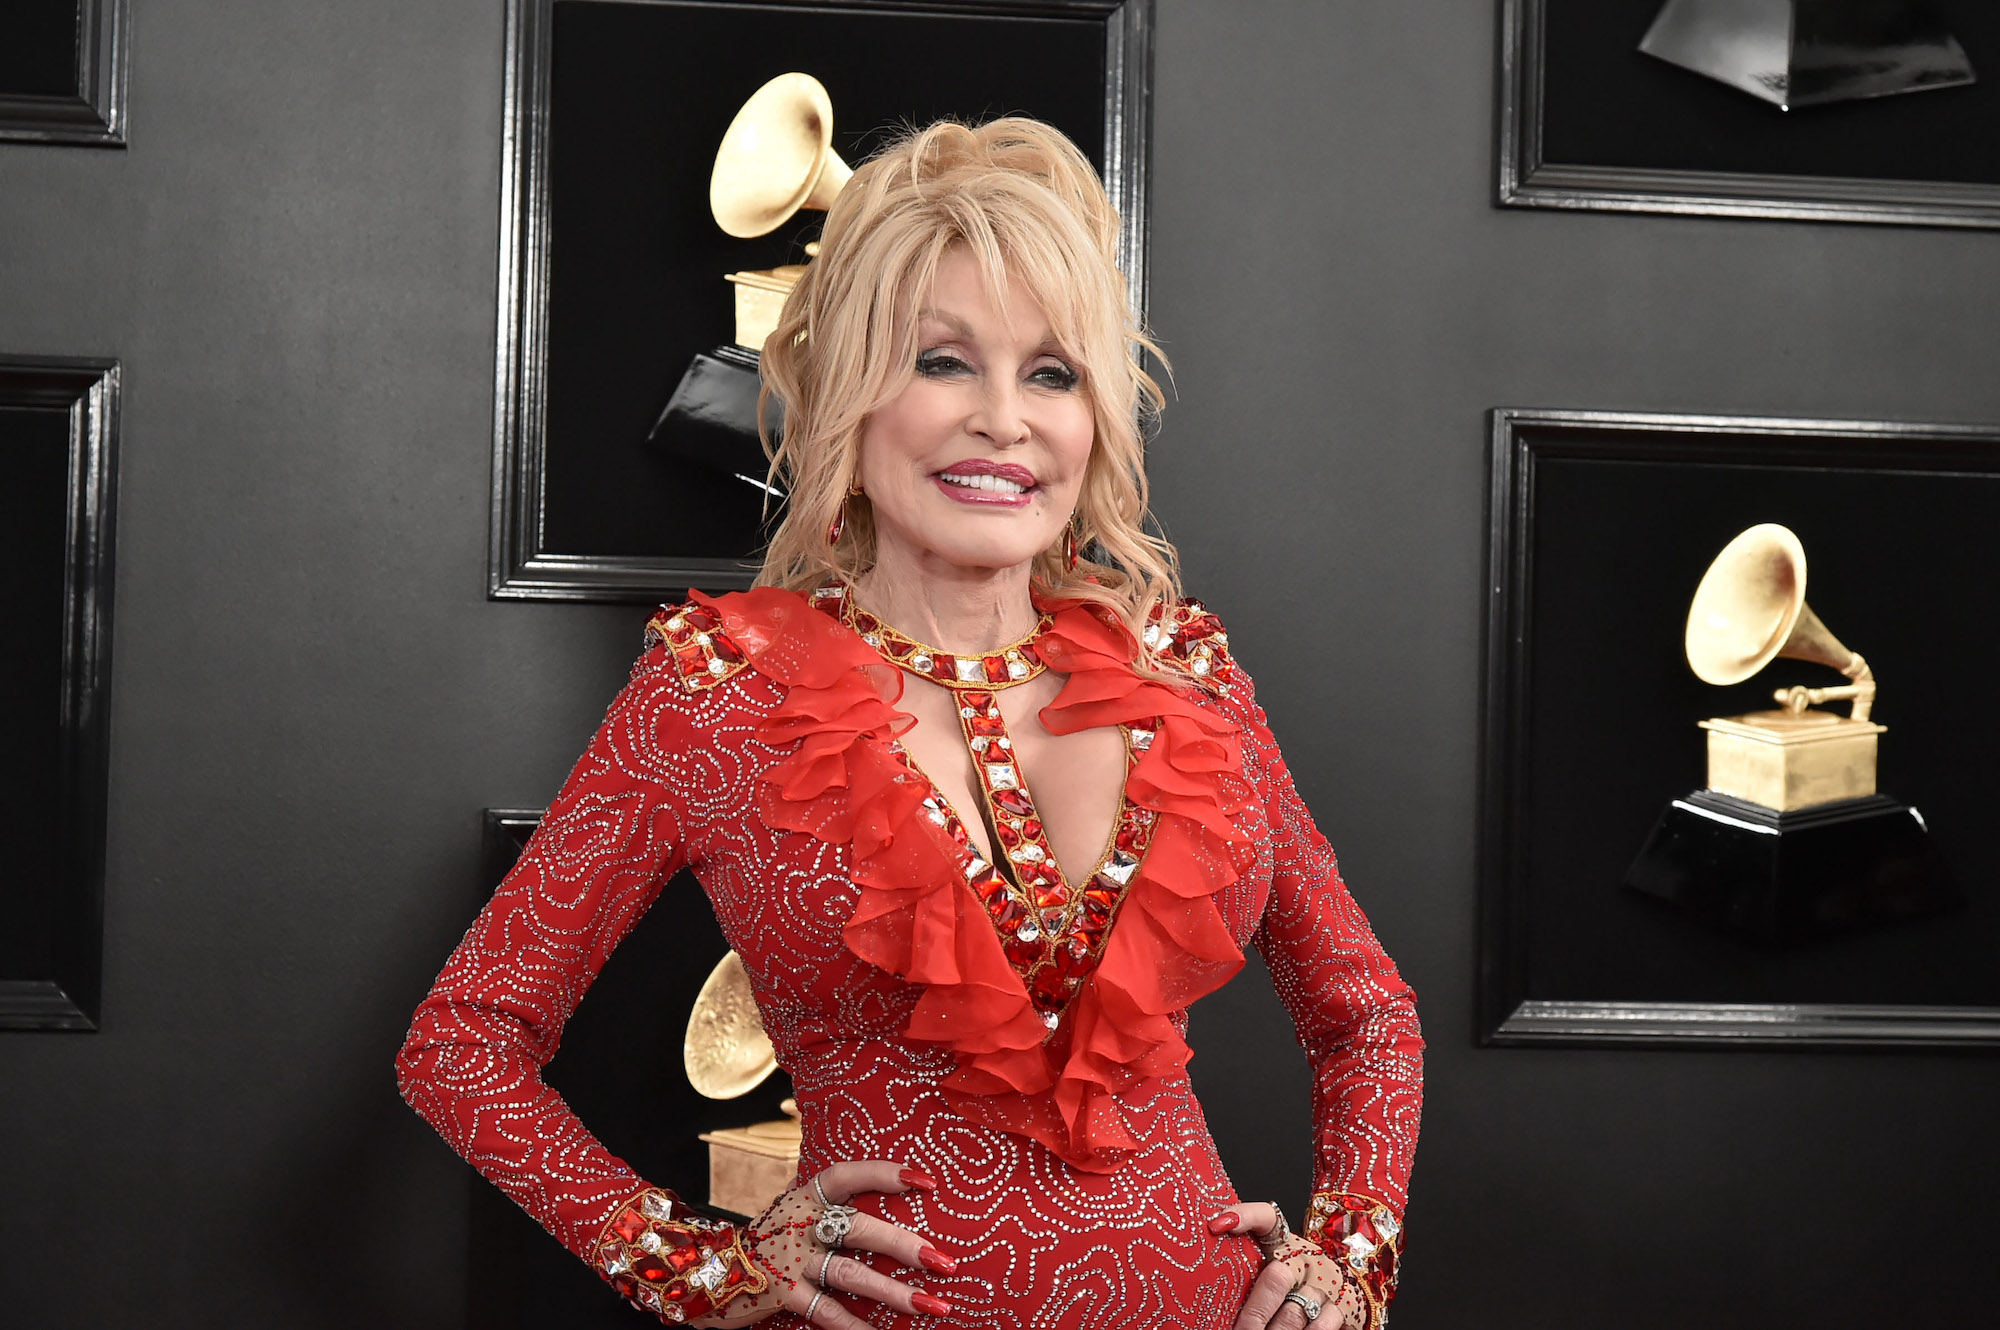 Dolly Parton attending the 61st Annual Grammy Awards in 2019